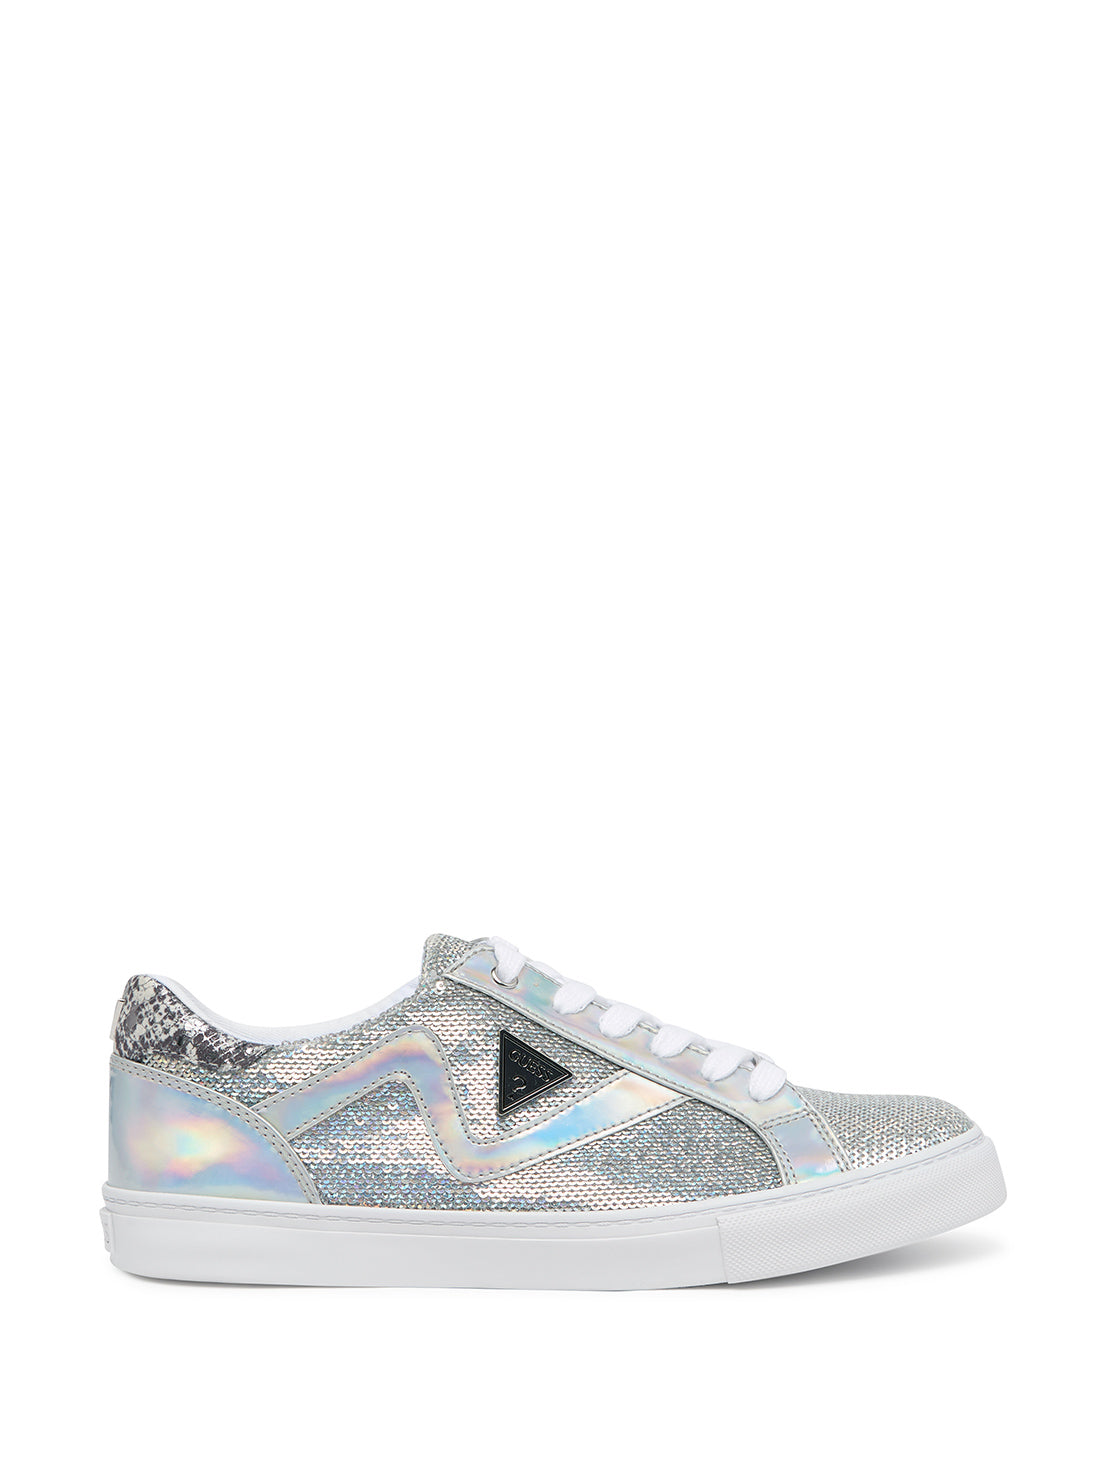 Silver Picks-A Sneakers | GUESS Women's shoes | front view